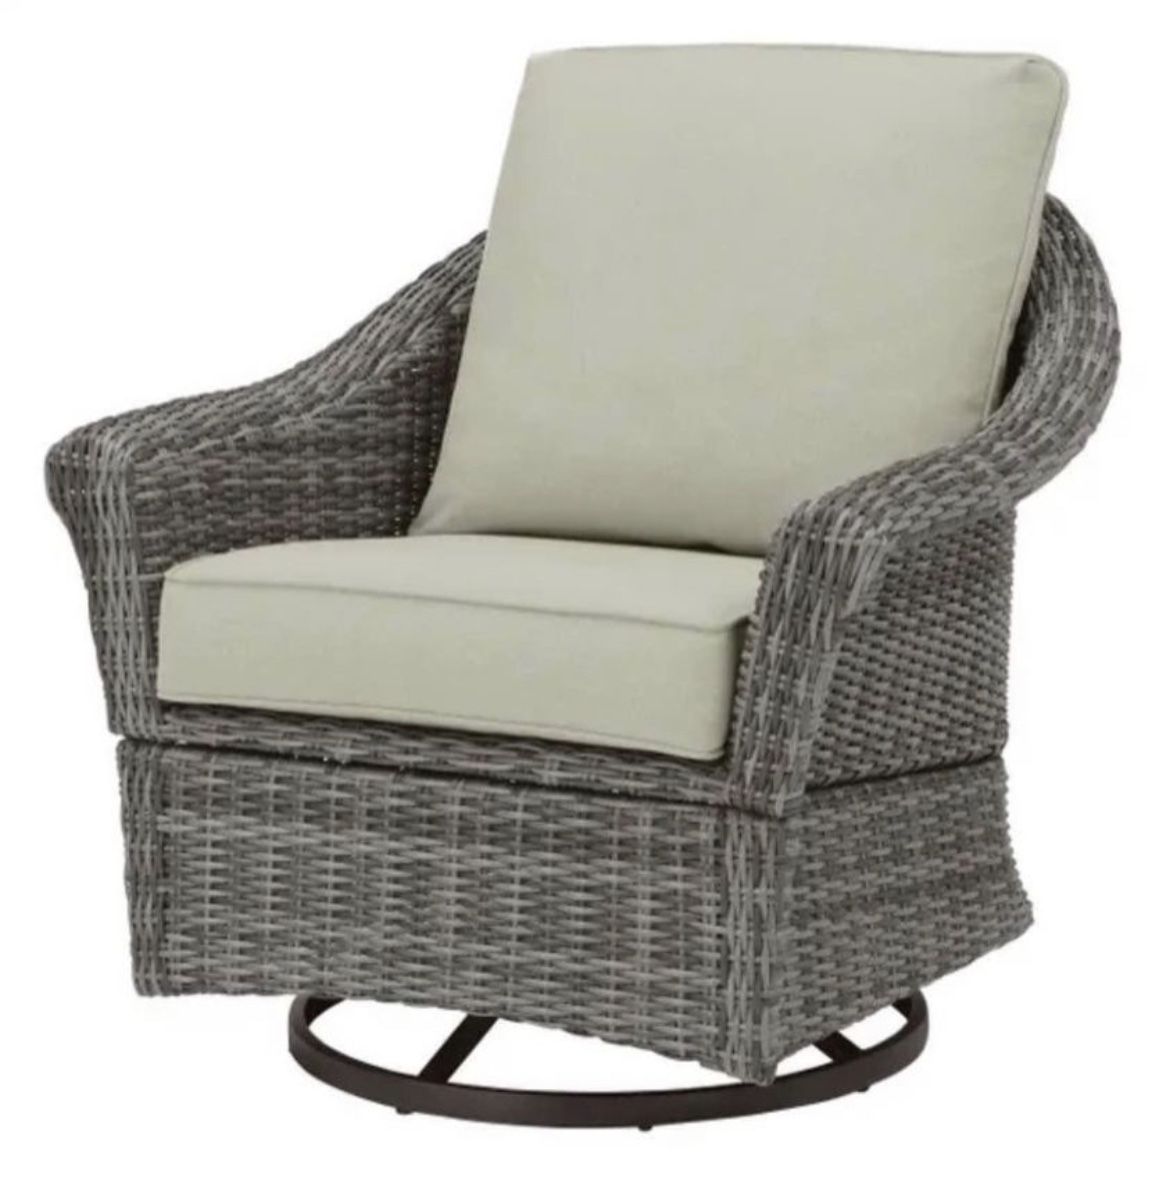 Hampton Bay Chasewood Brown Glider Wicker Outdoor Patio Stationary Chair and Swivel Lounge Chair